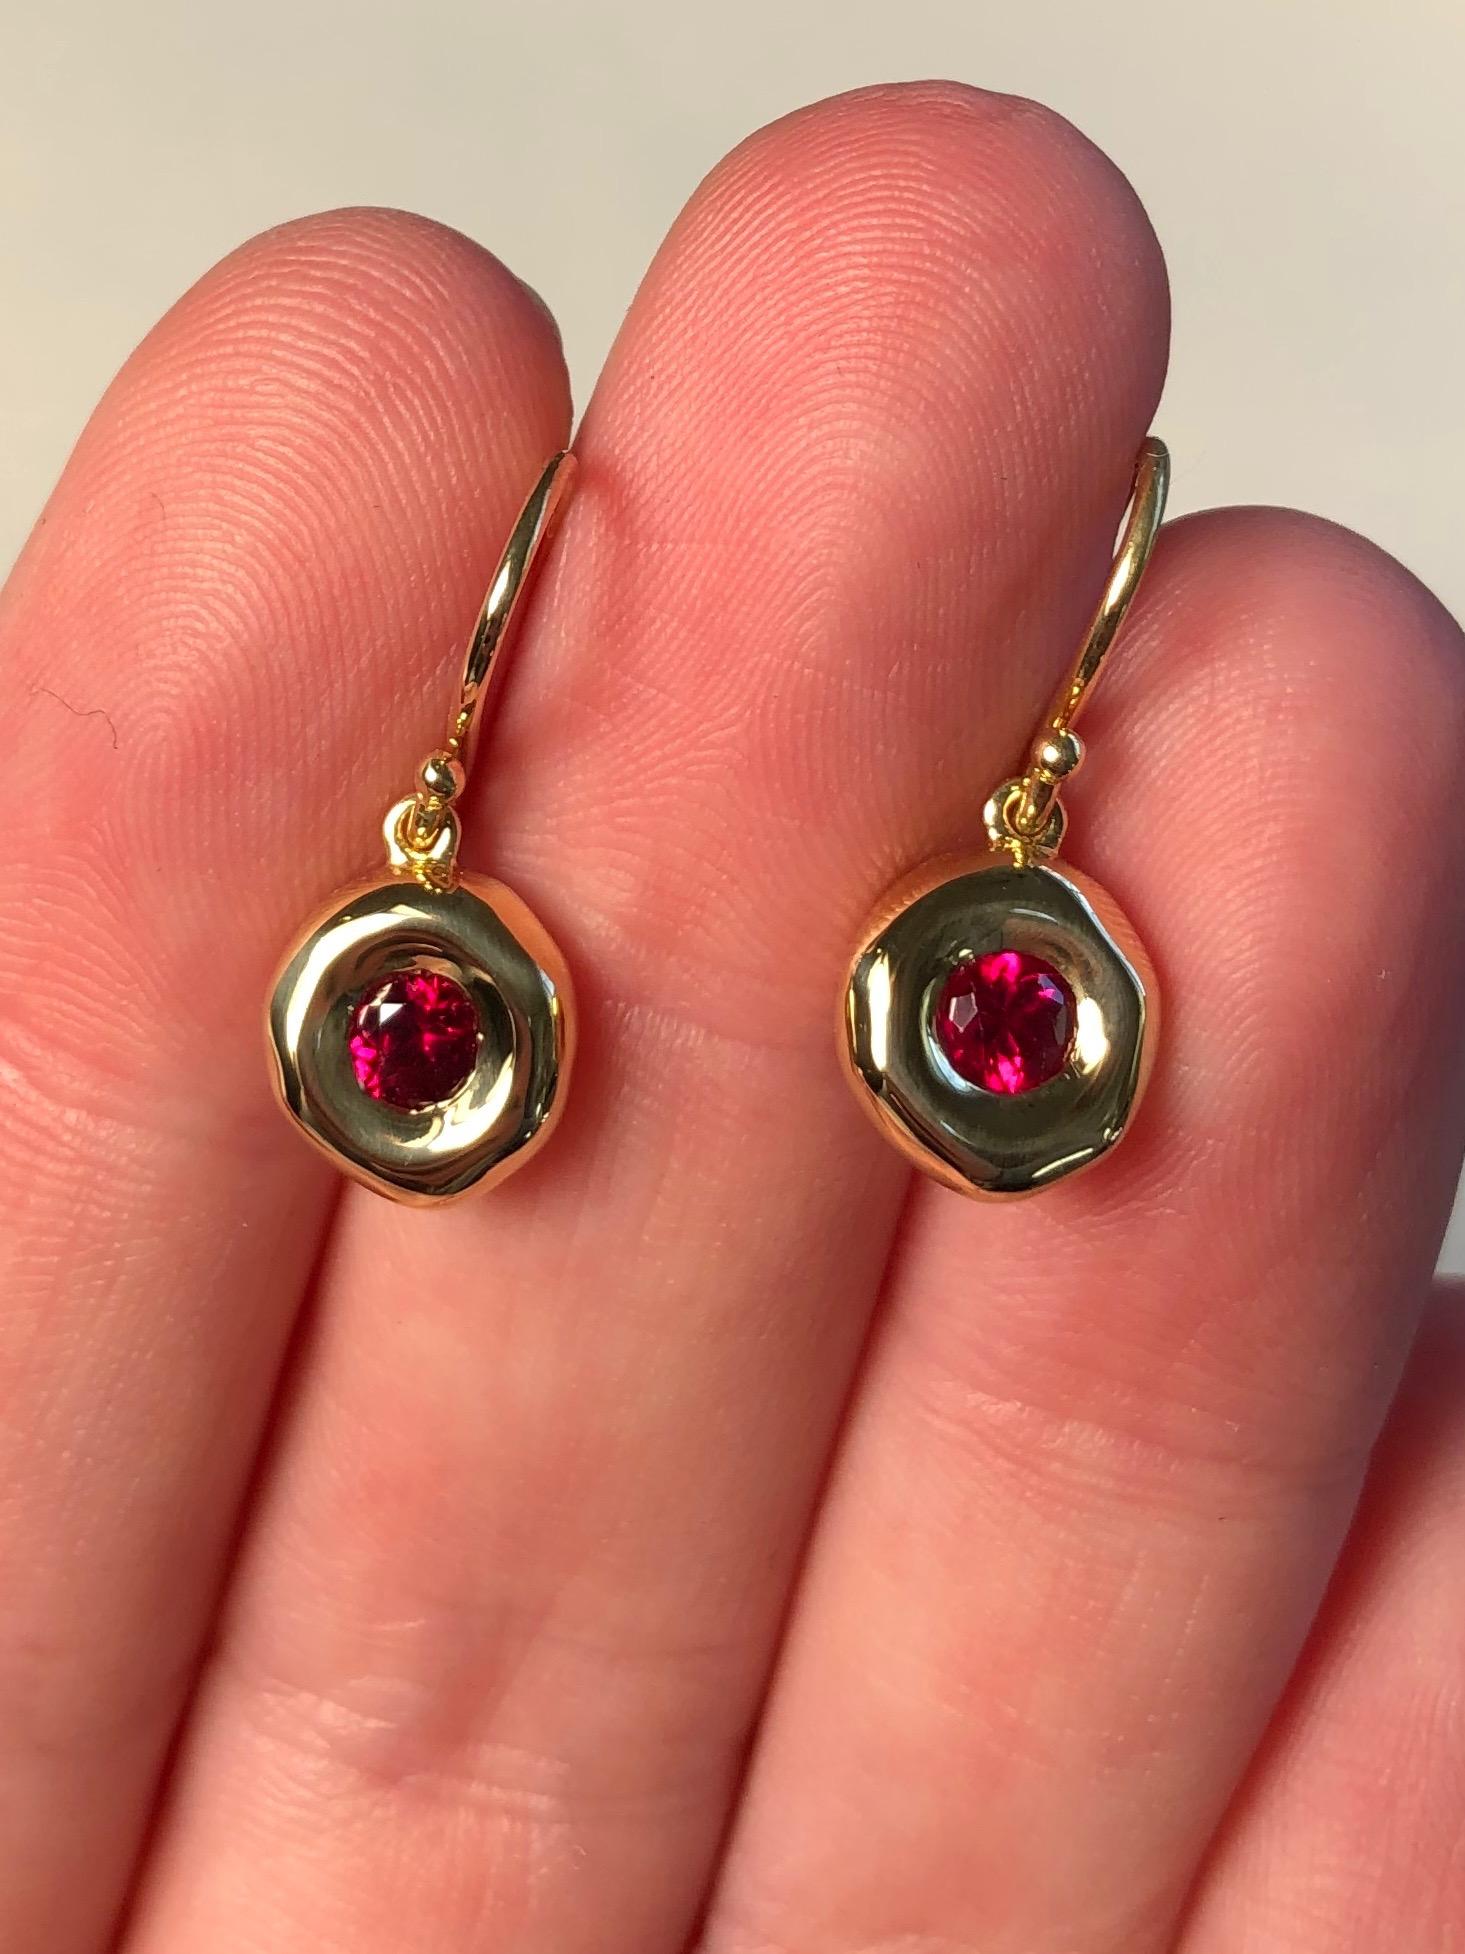 
Gemfields Mozambique rubies set in 18 karat solid gold bezel, on a french hook. $3,900.

Dimensions: 1.7 cm from top of french hook arch to bottom x 0.8 cm in width x 0.3 cm depth. 4 grams.

5 mm Gemfields Mozambique rubies

These earring were hand